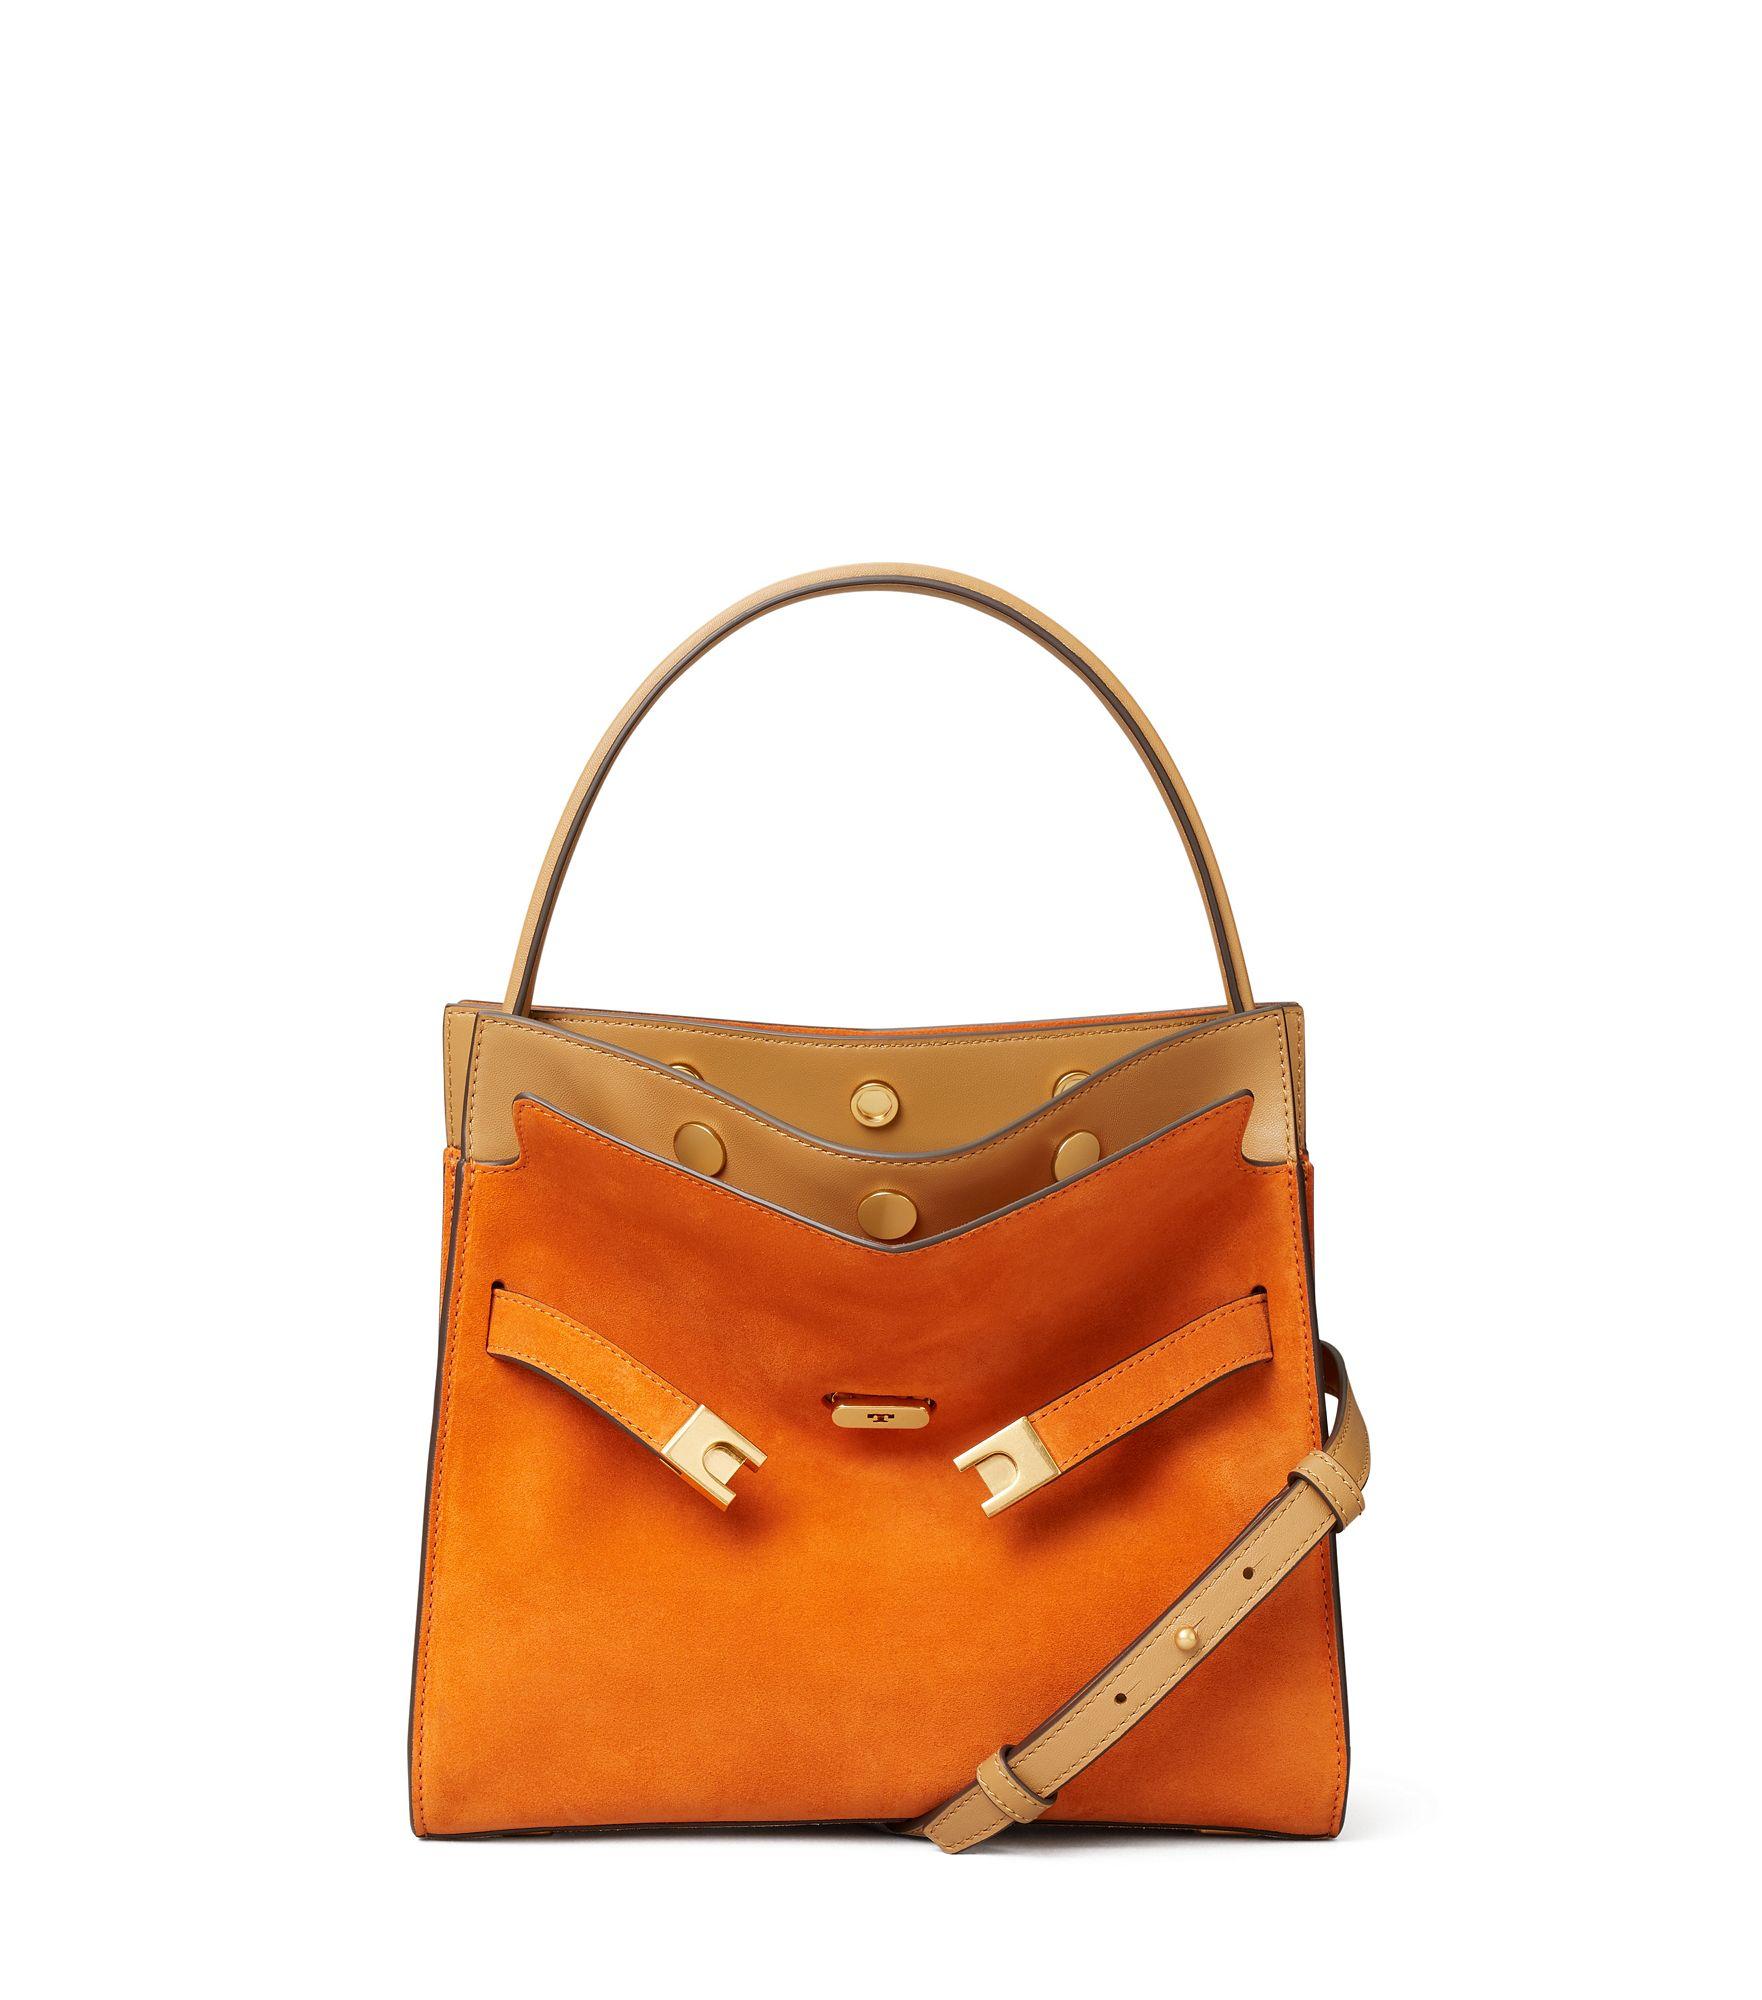 Tory Burch Lee Radziwill Small Double Bag in Orange | Lyst Canada